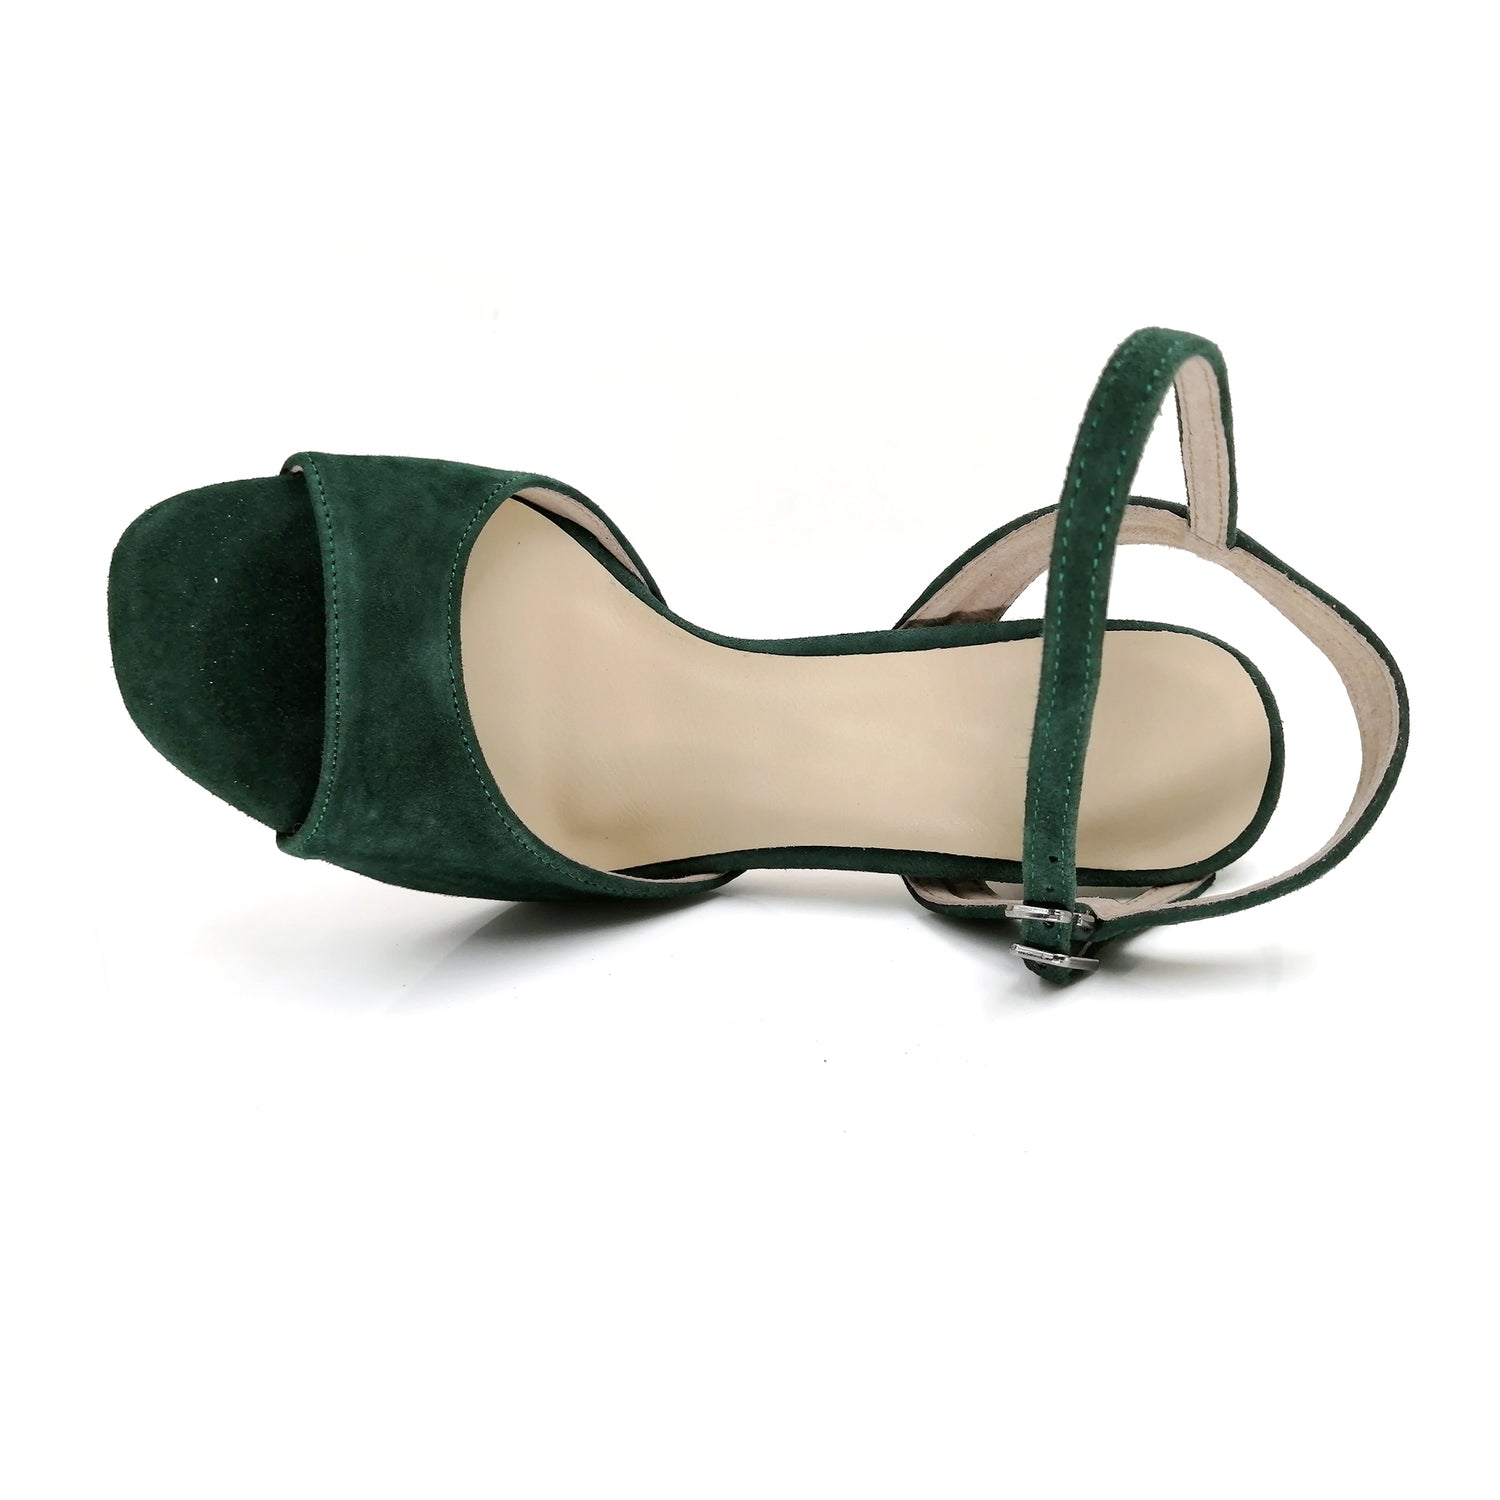 Elegant Pro Dancer Ladies Tango Shoes with High Heel and Leather Sole in Dark Green1